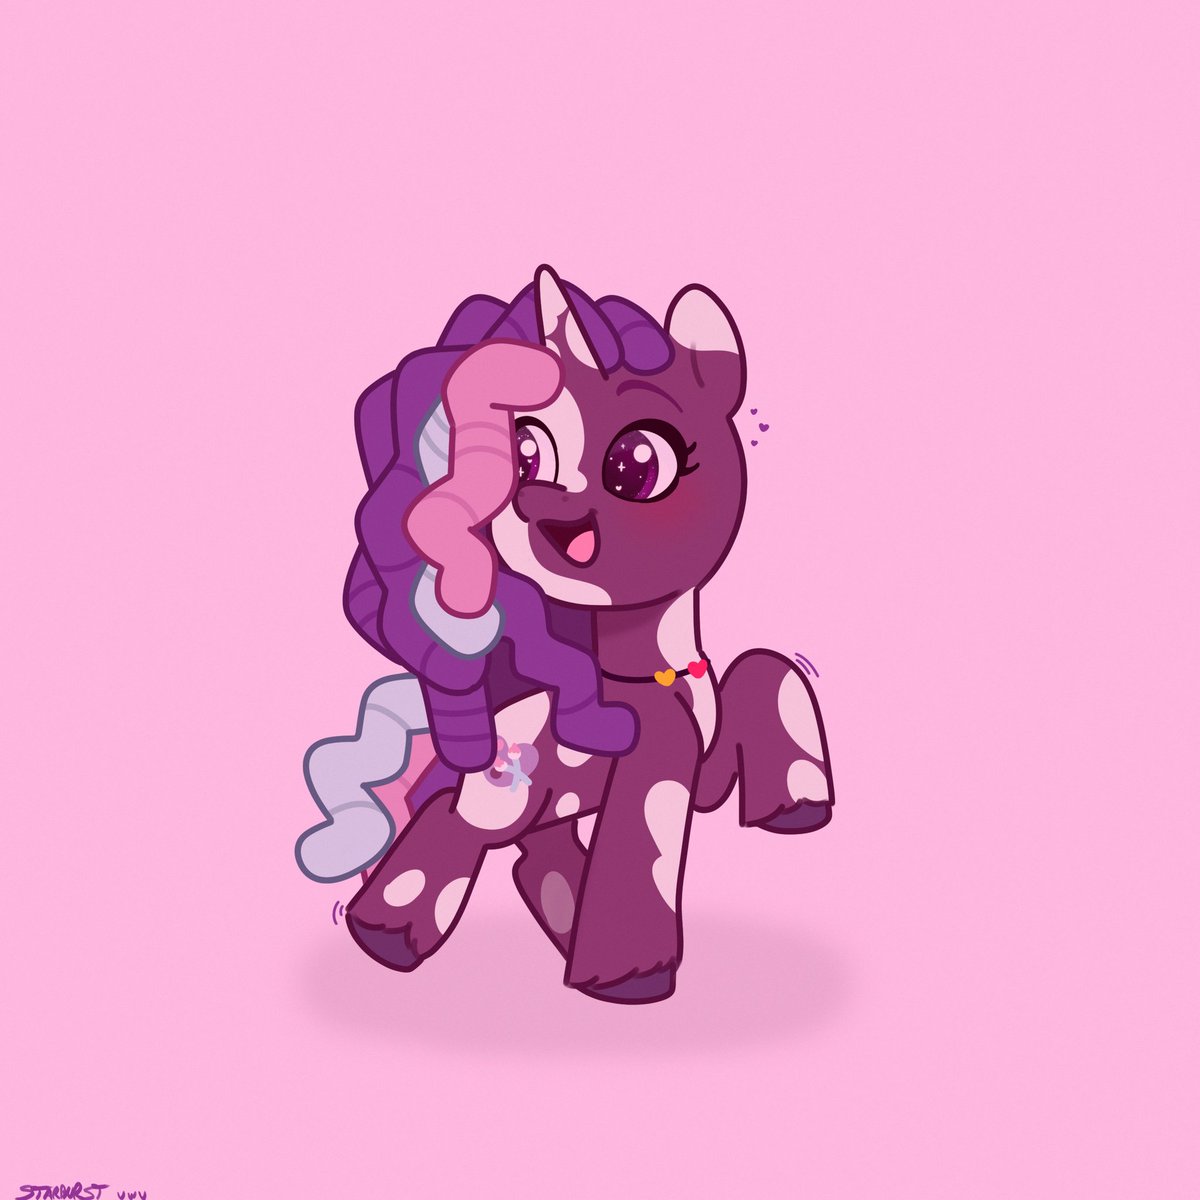 just the most adorable of all💜🤍

#tellyourtale #Violetterainbow #mlpg5 #MLP #mlpfanart #mlpart #pony #mlpfandom #mylittlepony #cute